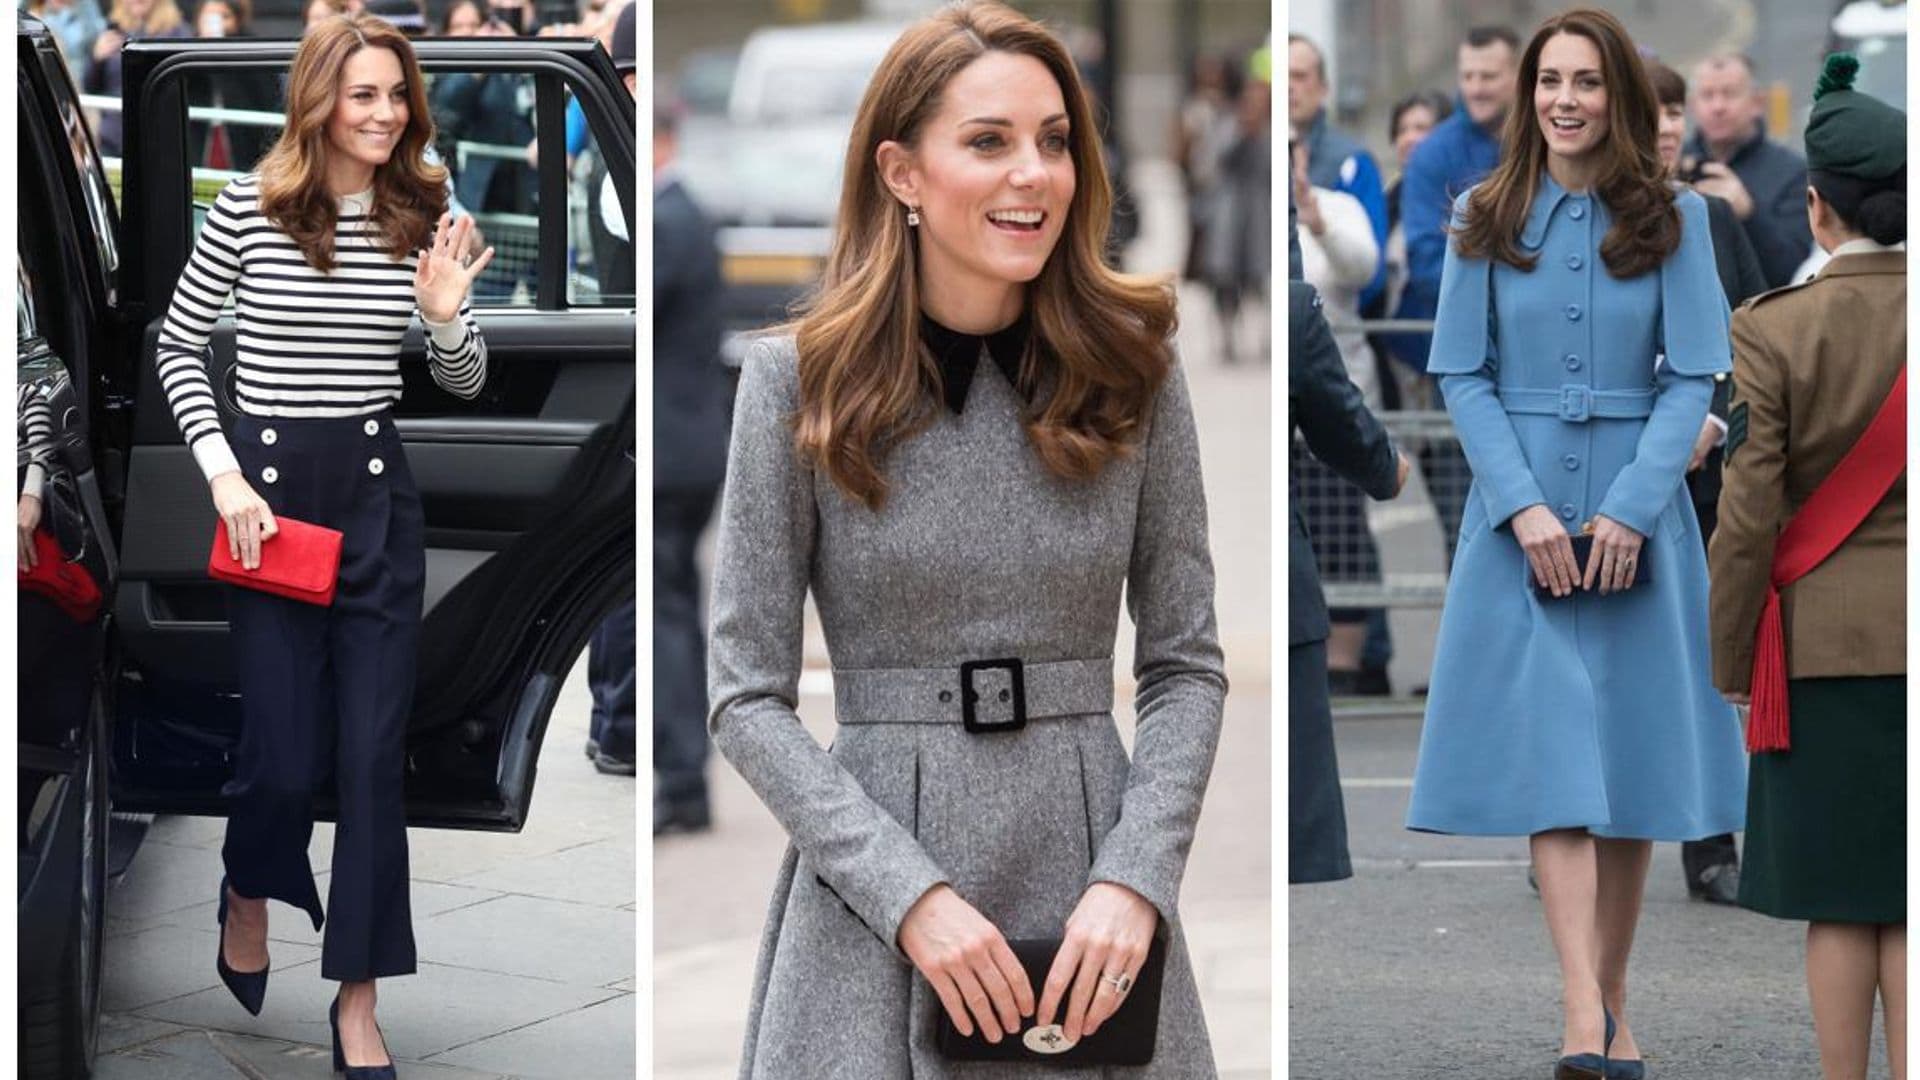 The 10 pieces that define Kate Middleton’s impeccable style